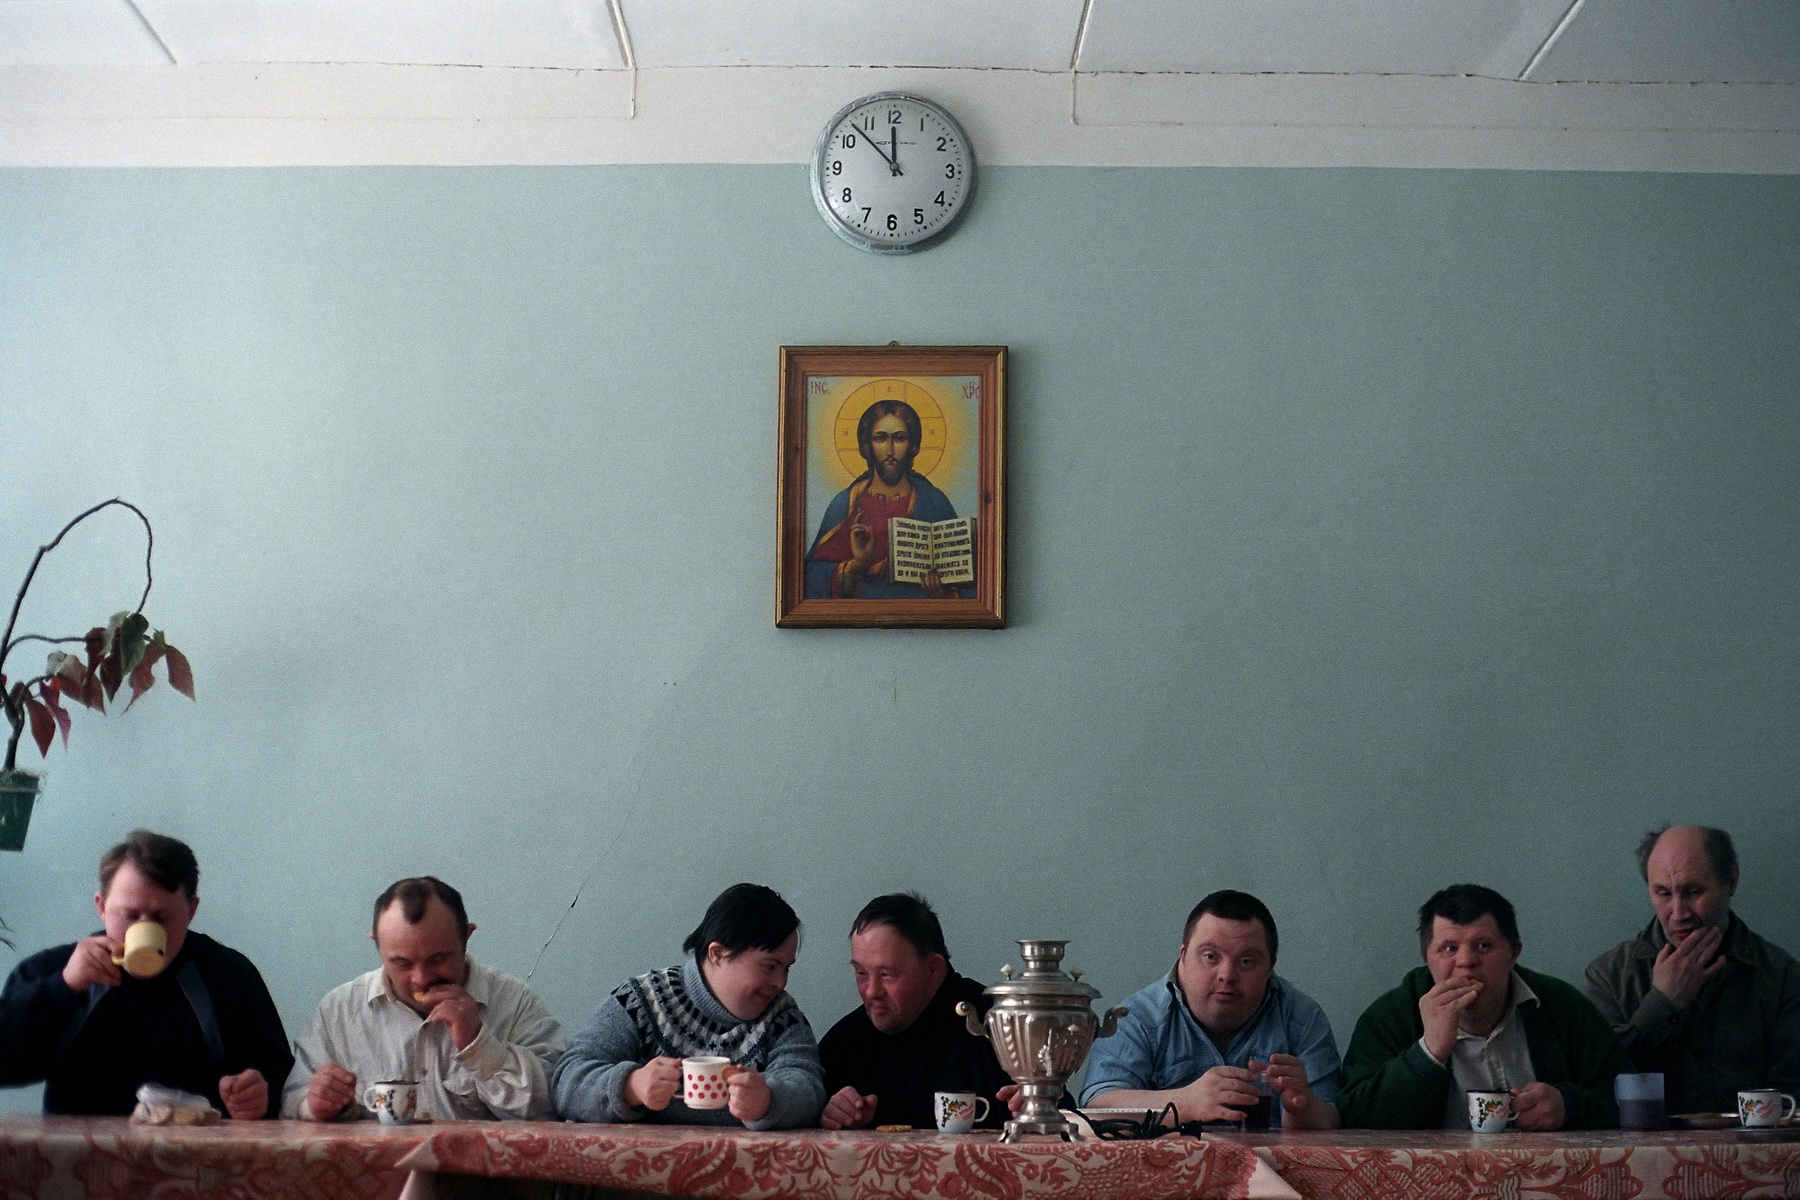 This photo, “Amateur troupe of the Naïve Theatre drinking tea. Psycho-neurological boarding school №7, St. Petersburg, 2003”, was chosen as the winner of World Press Photo 2004 in the category of Arts and Entertainment.